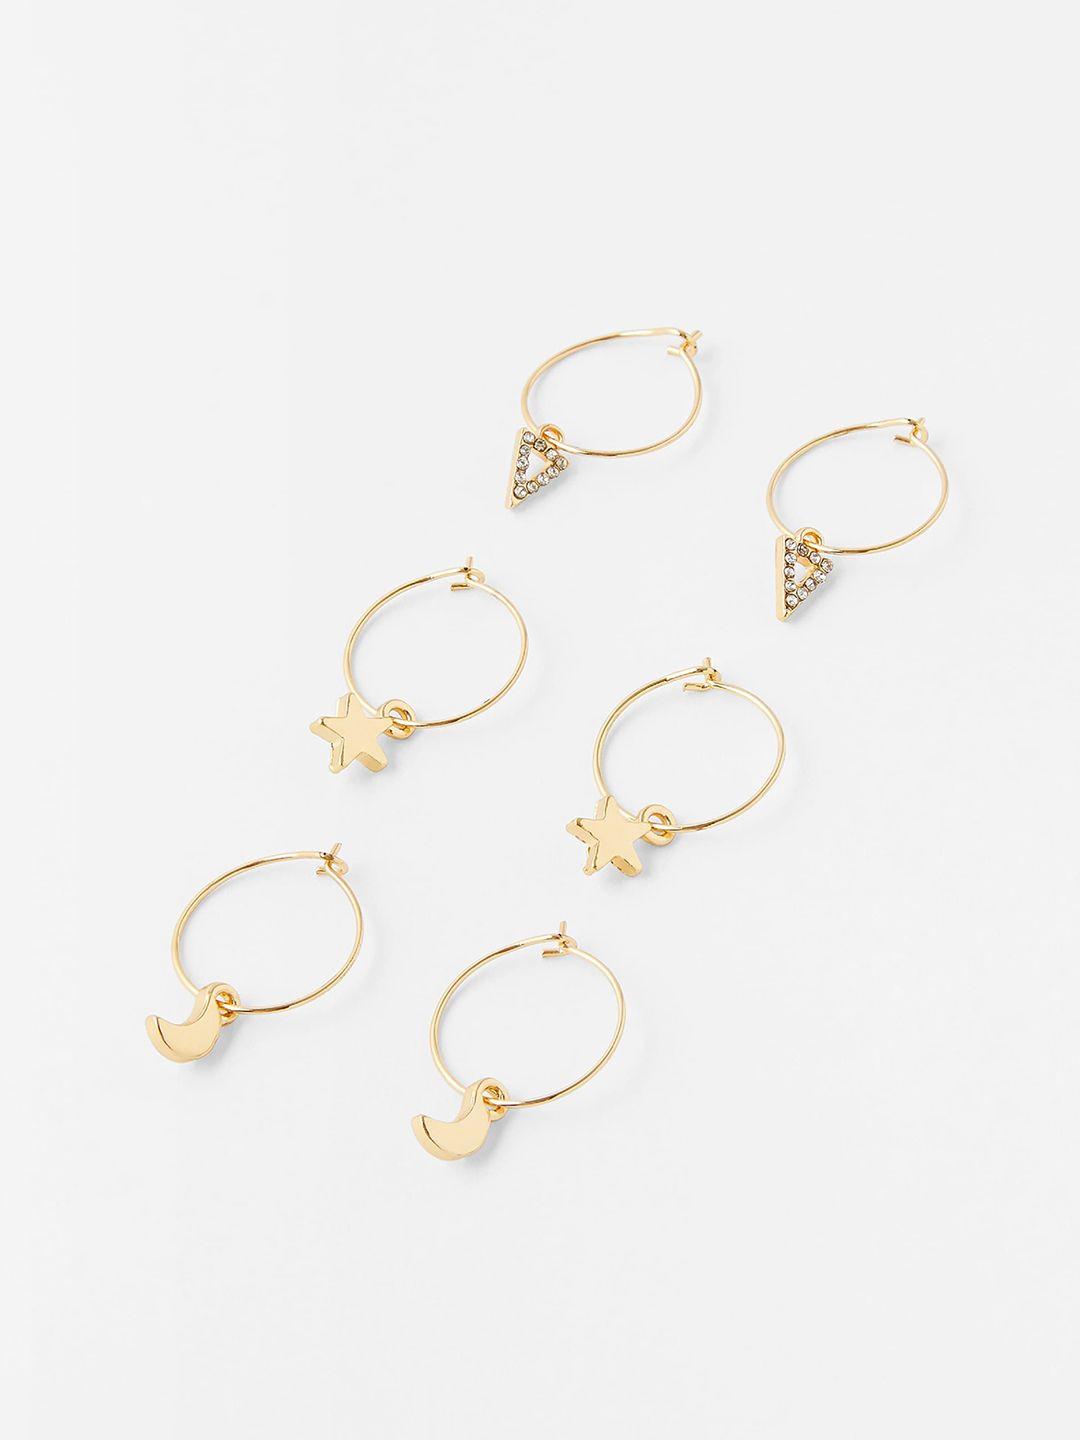 accessorize london pack of 3 gold-toned celestial contemporary hoop earrings